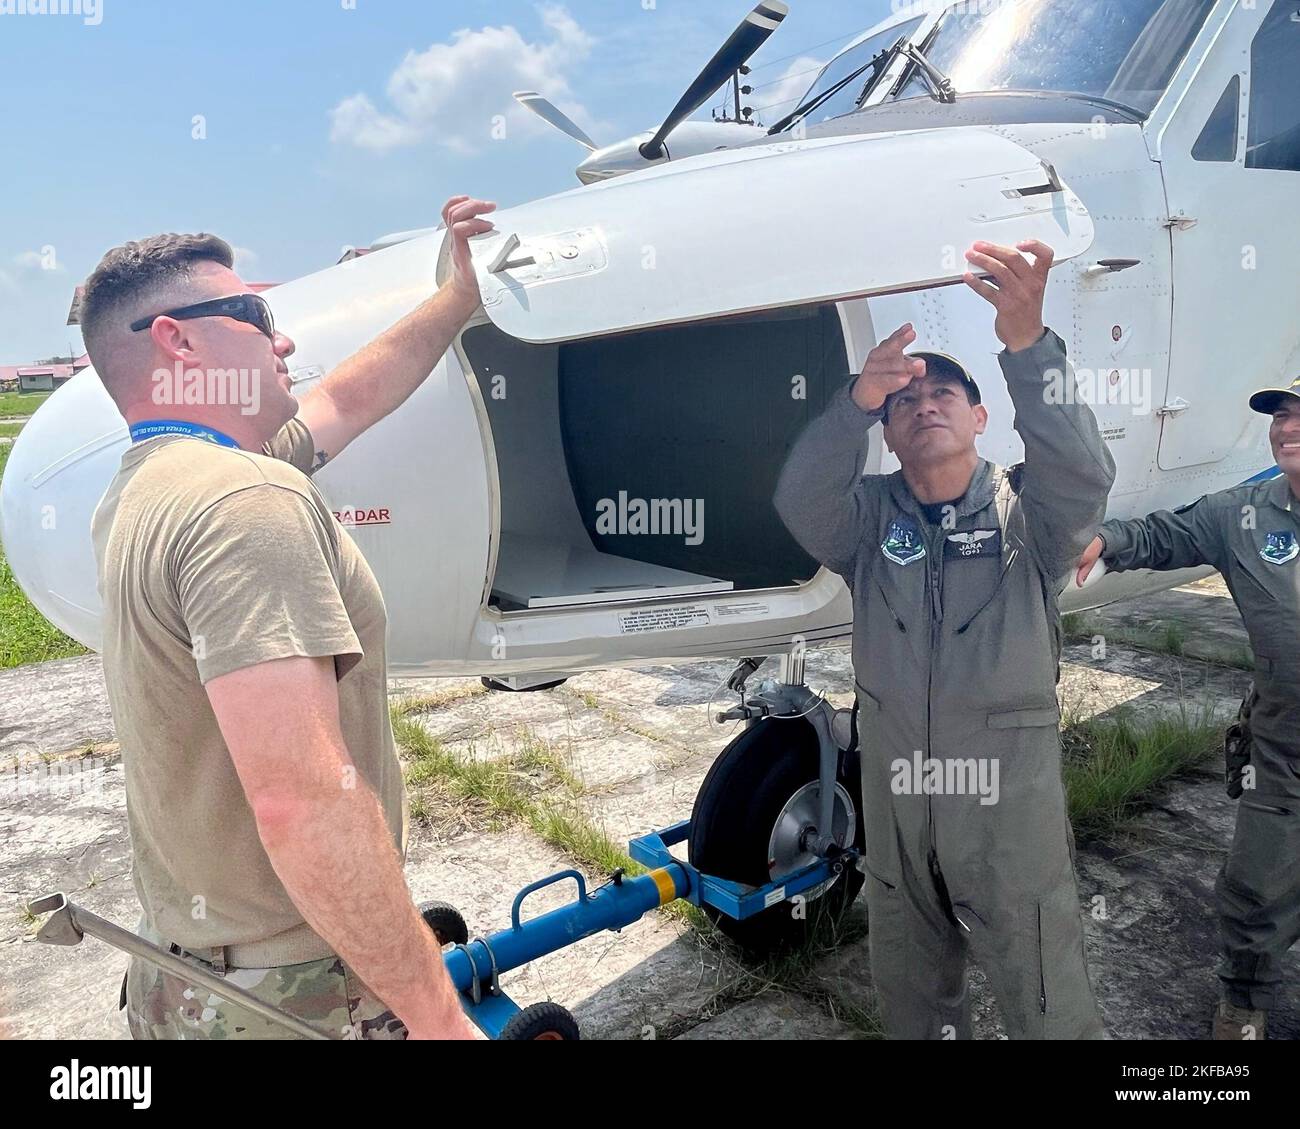 Tech. Sgt. Jacob Haines, left, a 571st Mobility Support Advisory Squadron advisor, inspects a DHC-6 Twin Otter aircraft with Fuerza Aérea de Peru’s Técnico Segundo Aldo Otrilla-Jara, right, a Grupo Aereo N. 42 DHC-6 maintainer, Sept. 1, 2022, in Base Area Coronel Francisco Secada Vignetta Air Base, Peru. The DHC-6 Twin Otter aircraft was a focal point during the out-in-the-field training between the two air force military service organizations. Stock Photo